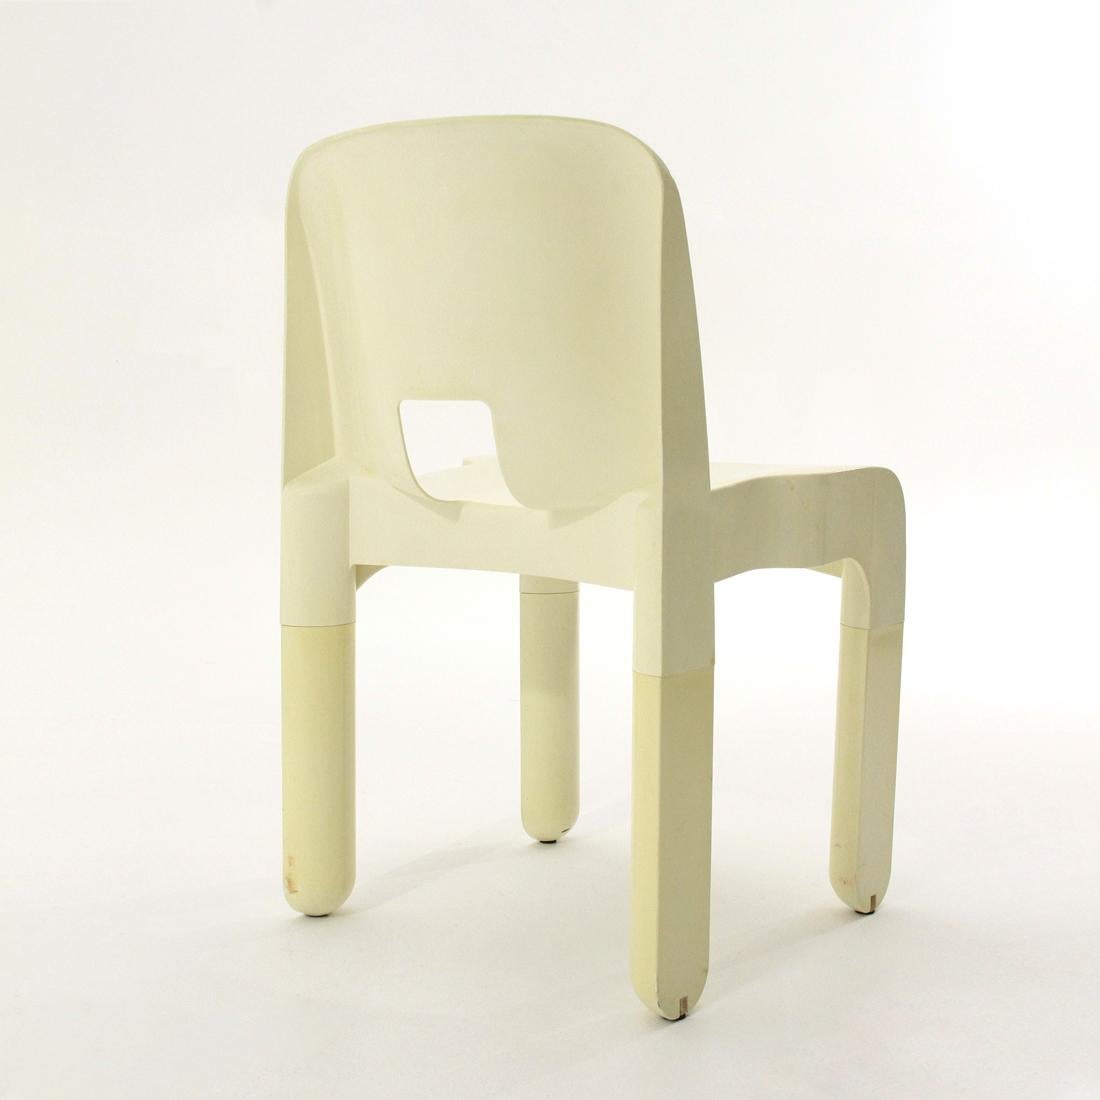 6 “4860” Chairs in White Plastic by Joe Colombo for Kartell, 1960s 7